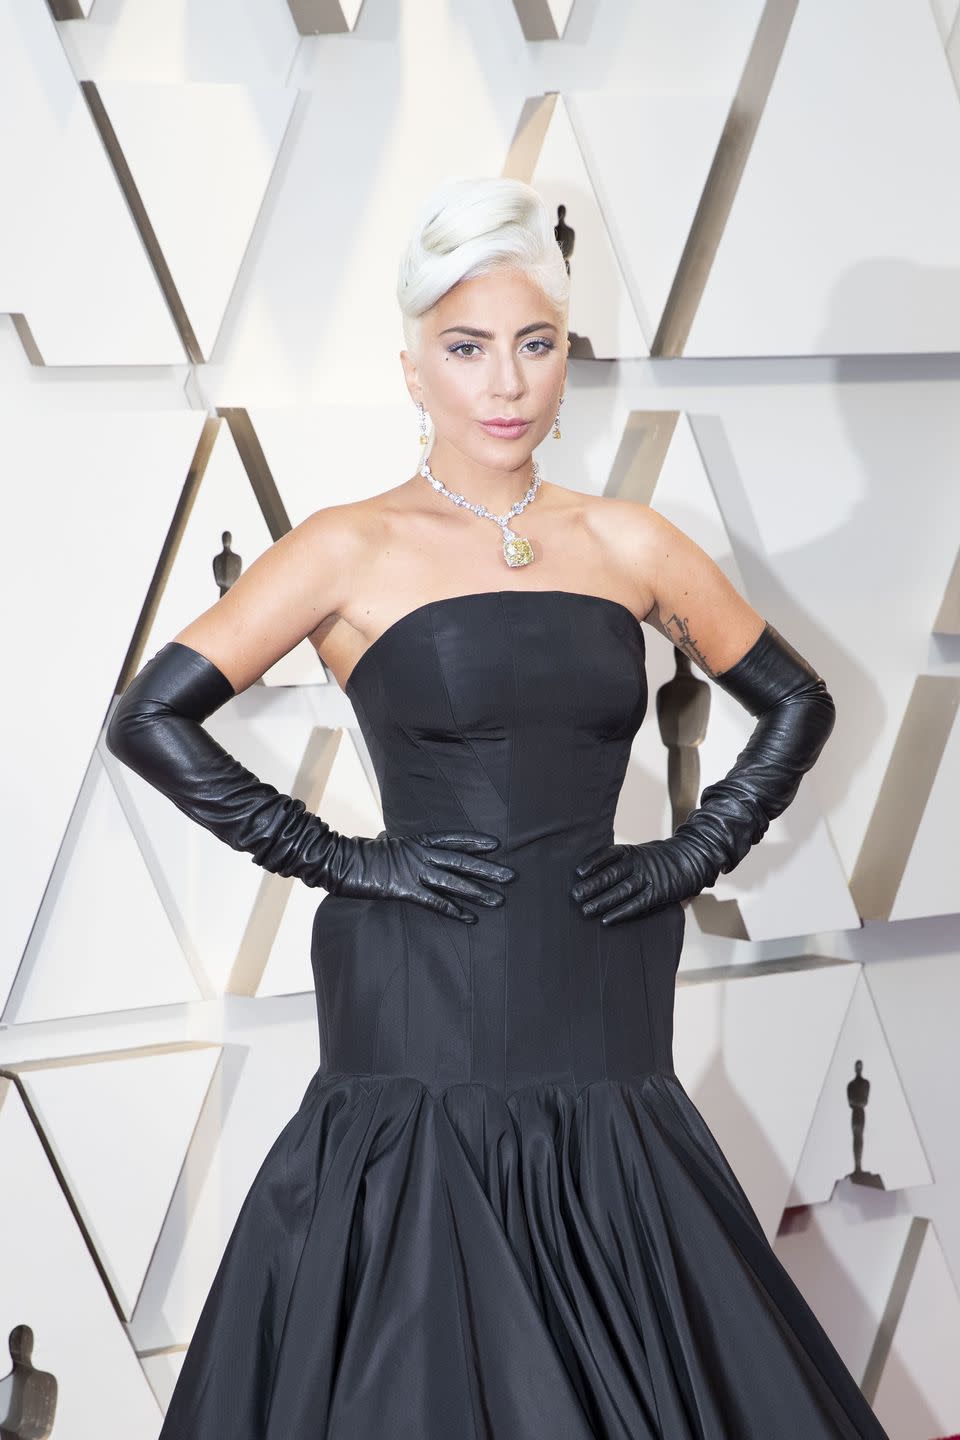 the oscars® the 91st oscars® broadcasts live on sunday, feb 24, 2019, at the dolby theatre® at hollywood highland center® in hollywood and will be televised live on the walt disney television via getty images television network at 800 pm est500 pm pst rick rowell via getty images lady gaga